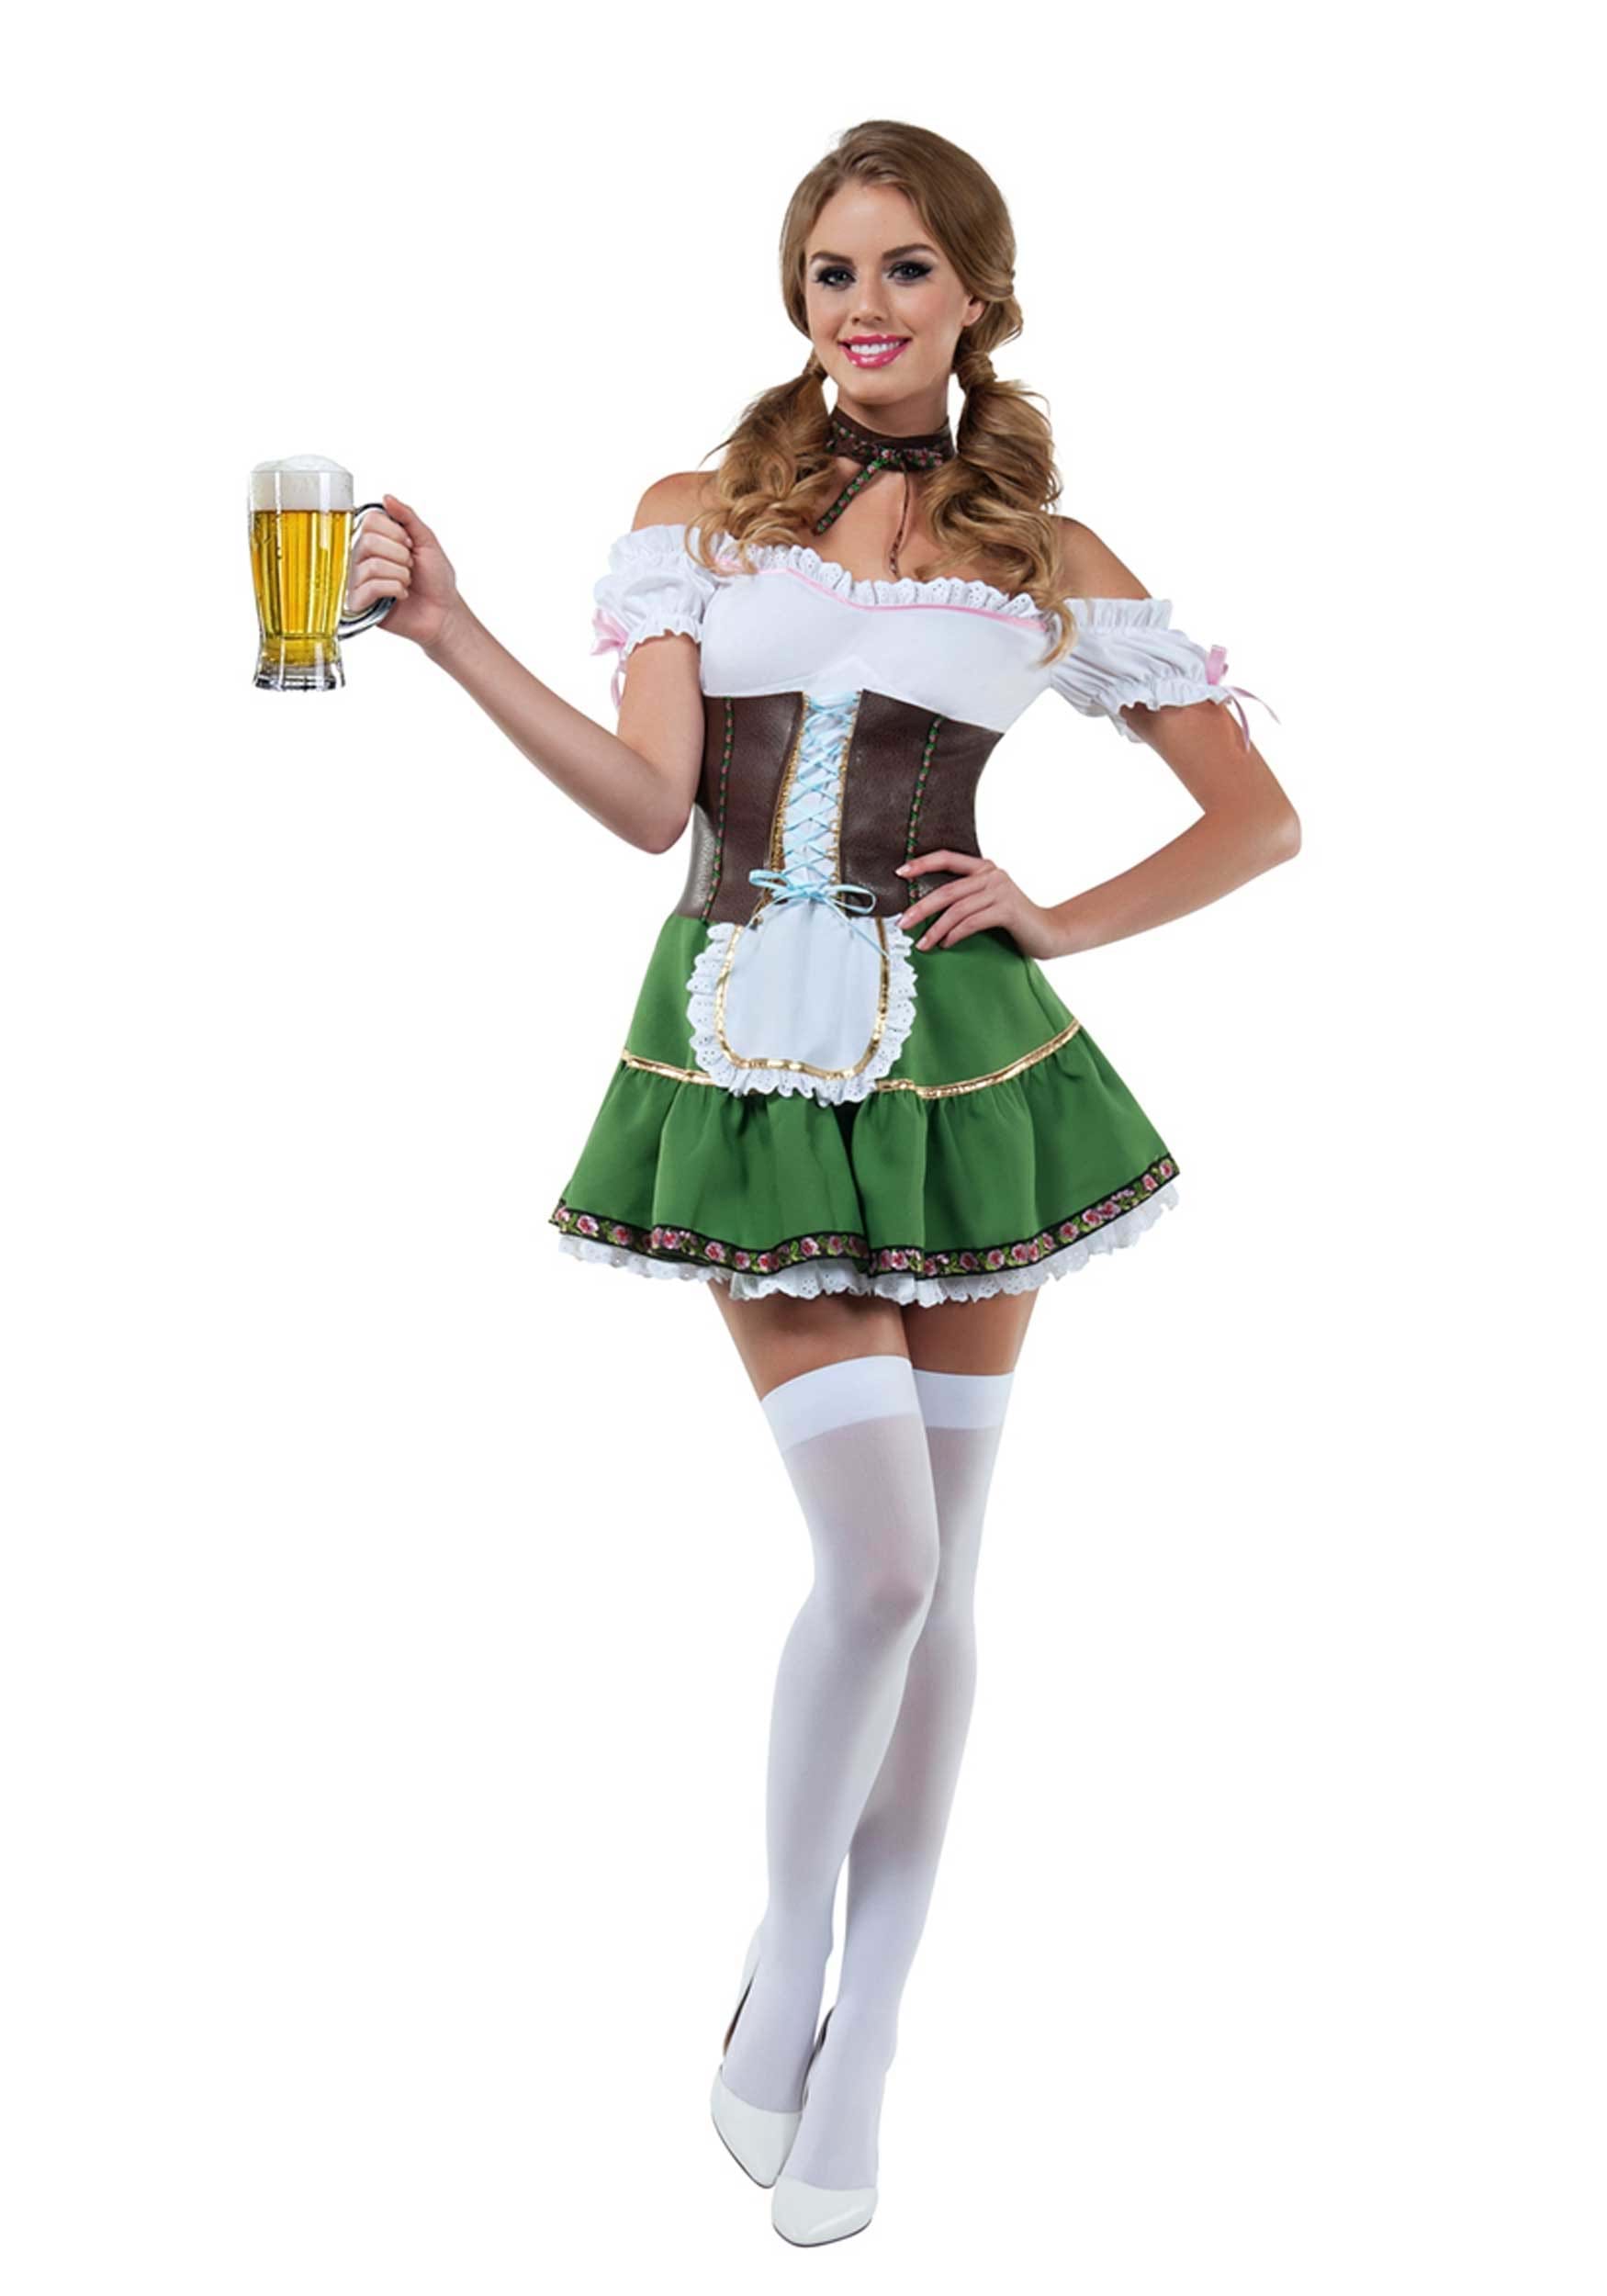 Photos - Fancy Dress Starline, LLC. Sexy Beer Girl Costume for Women Yellow/Green/White